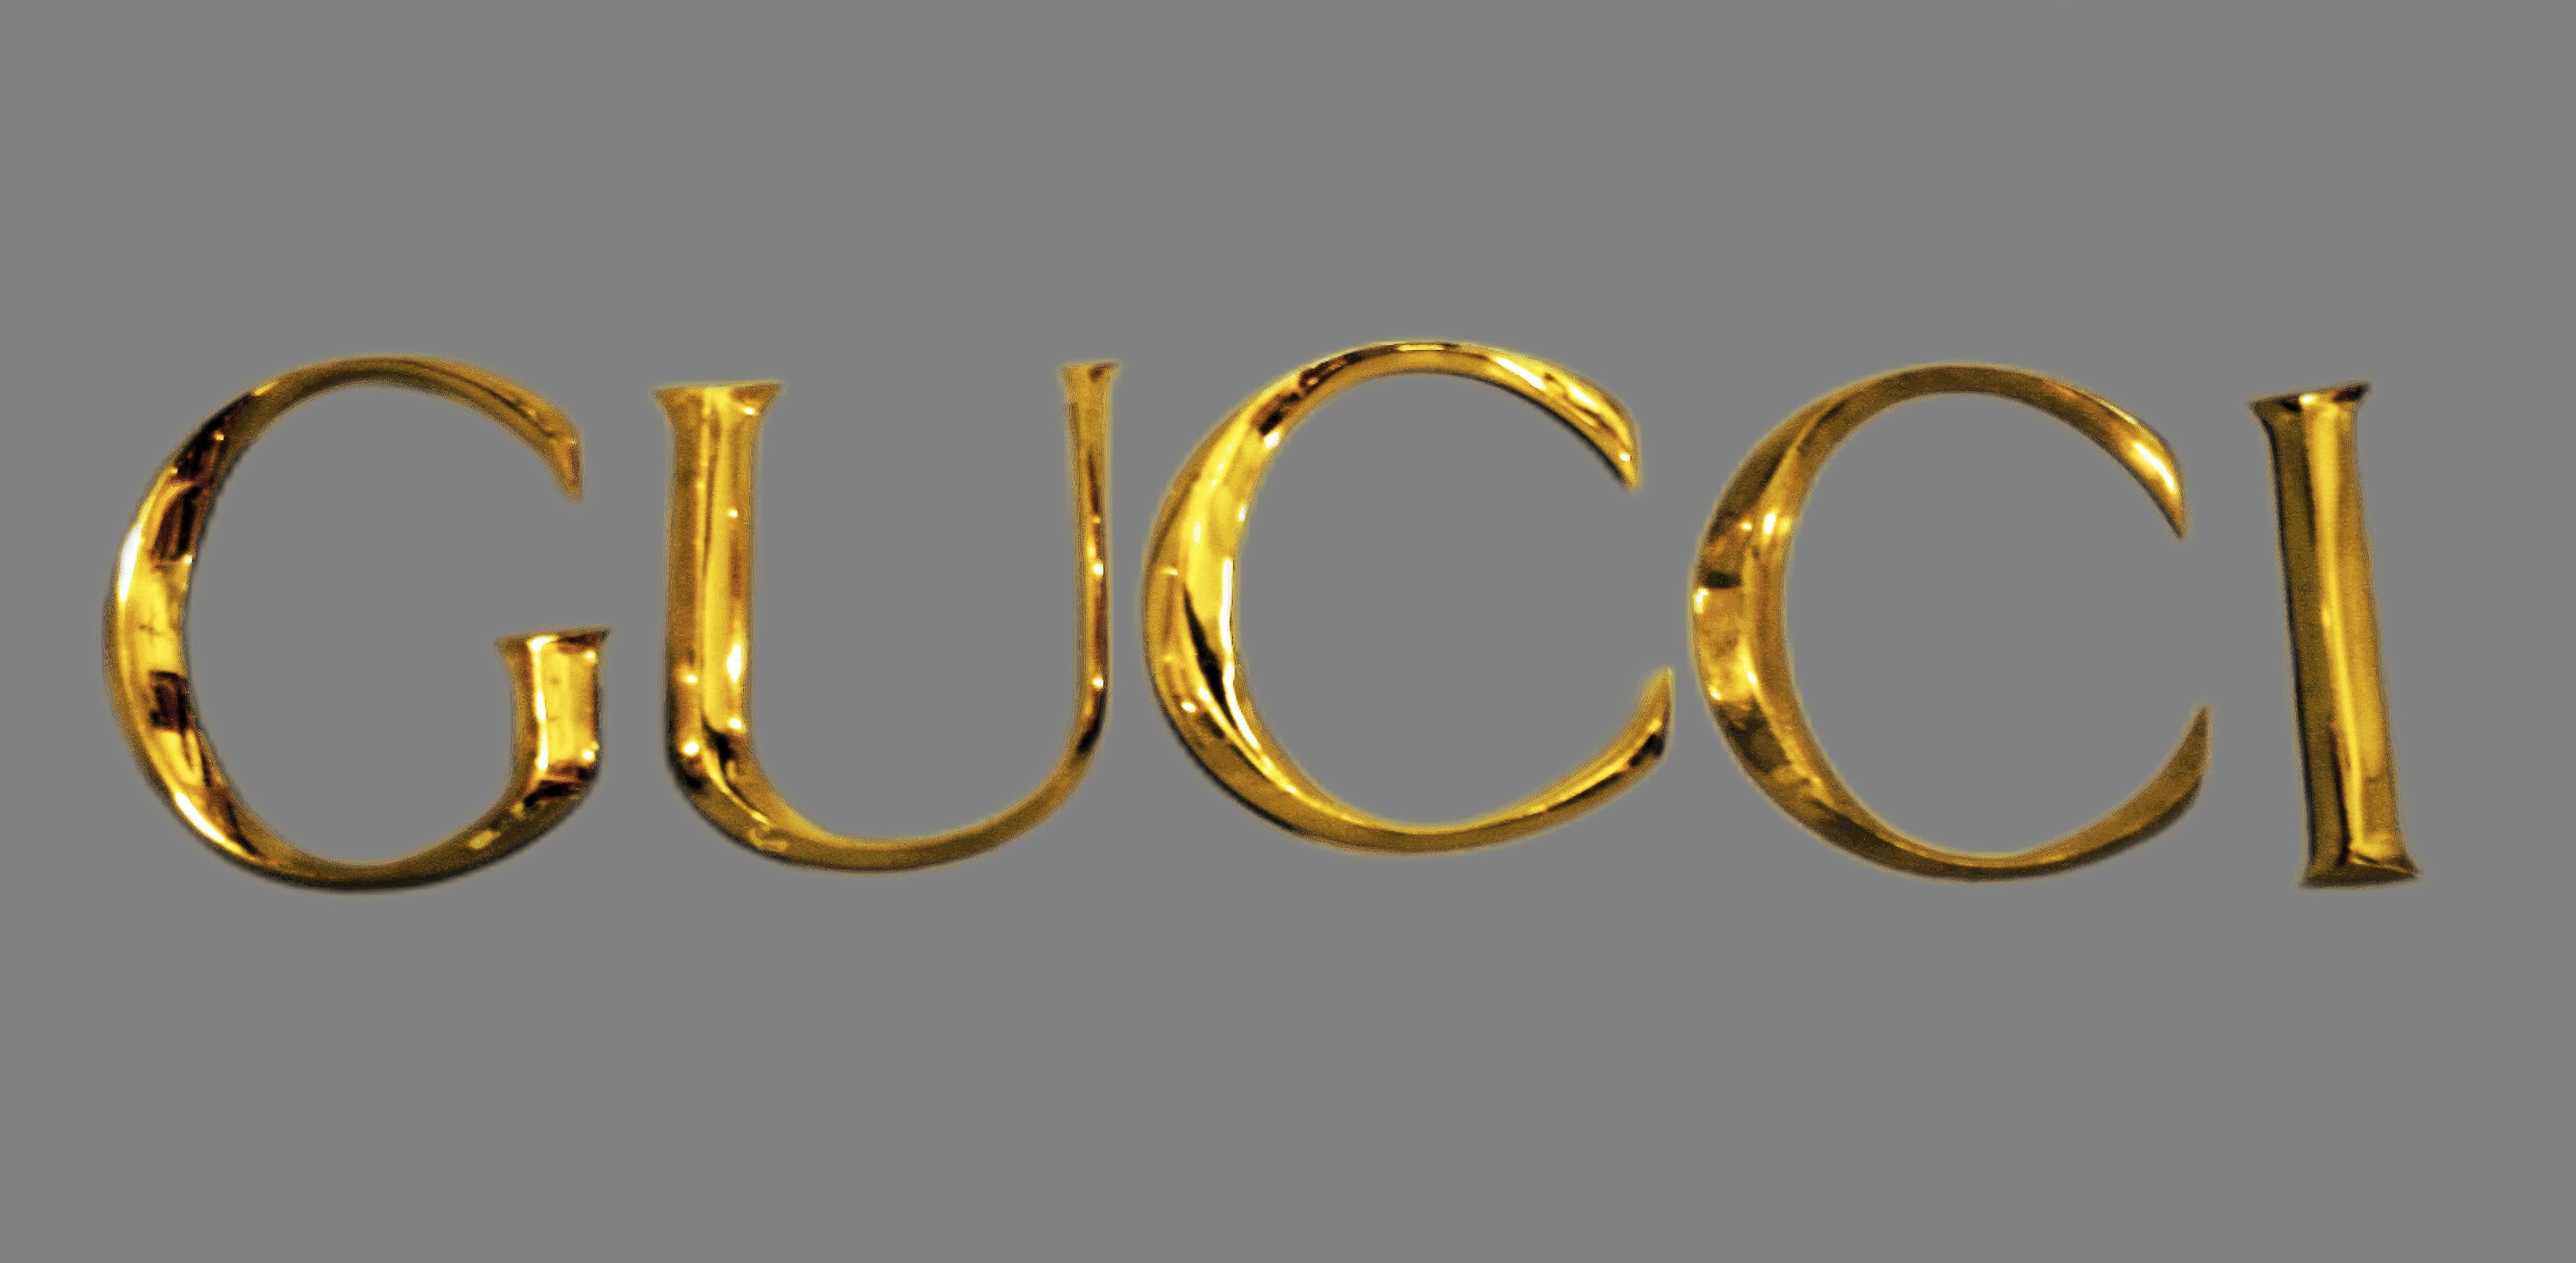 Late 20th century decorative wall ornament Gucci letters made in golden brass from one of their retail store

By: Gucci
Material: brass, copper, metal, zinc
Technique: cast, gilt, molded, polished, metalwork
Dimensions: 1.5 in x 9.5 in x 9.5